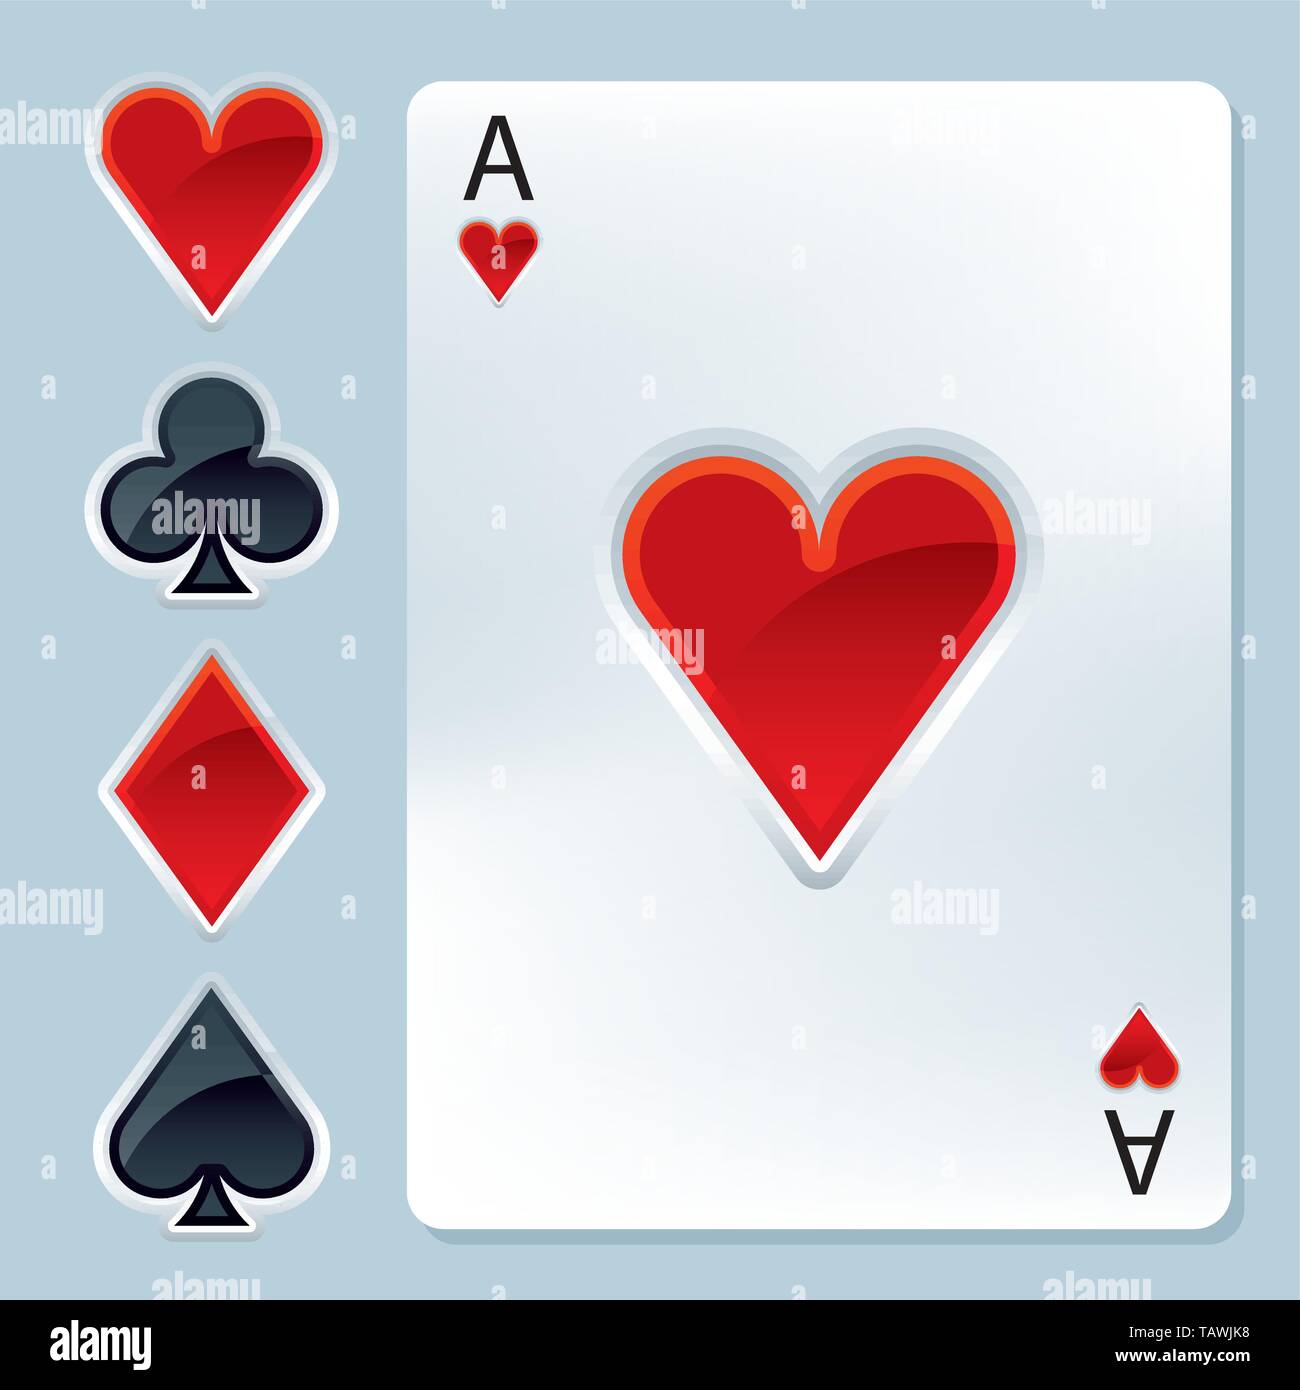 Ace heart and Heart Problems